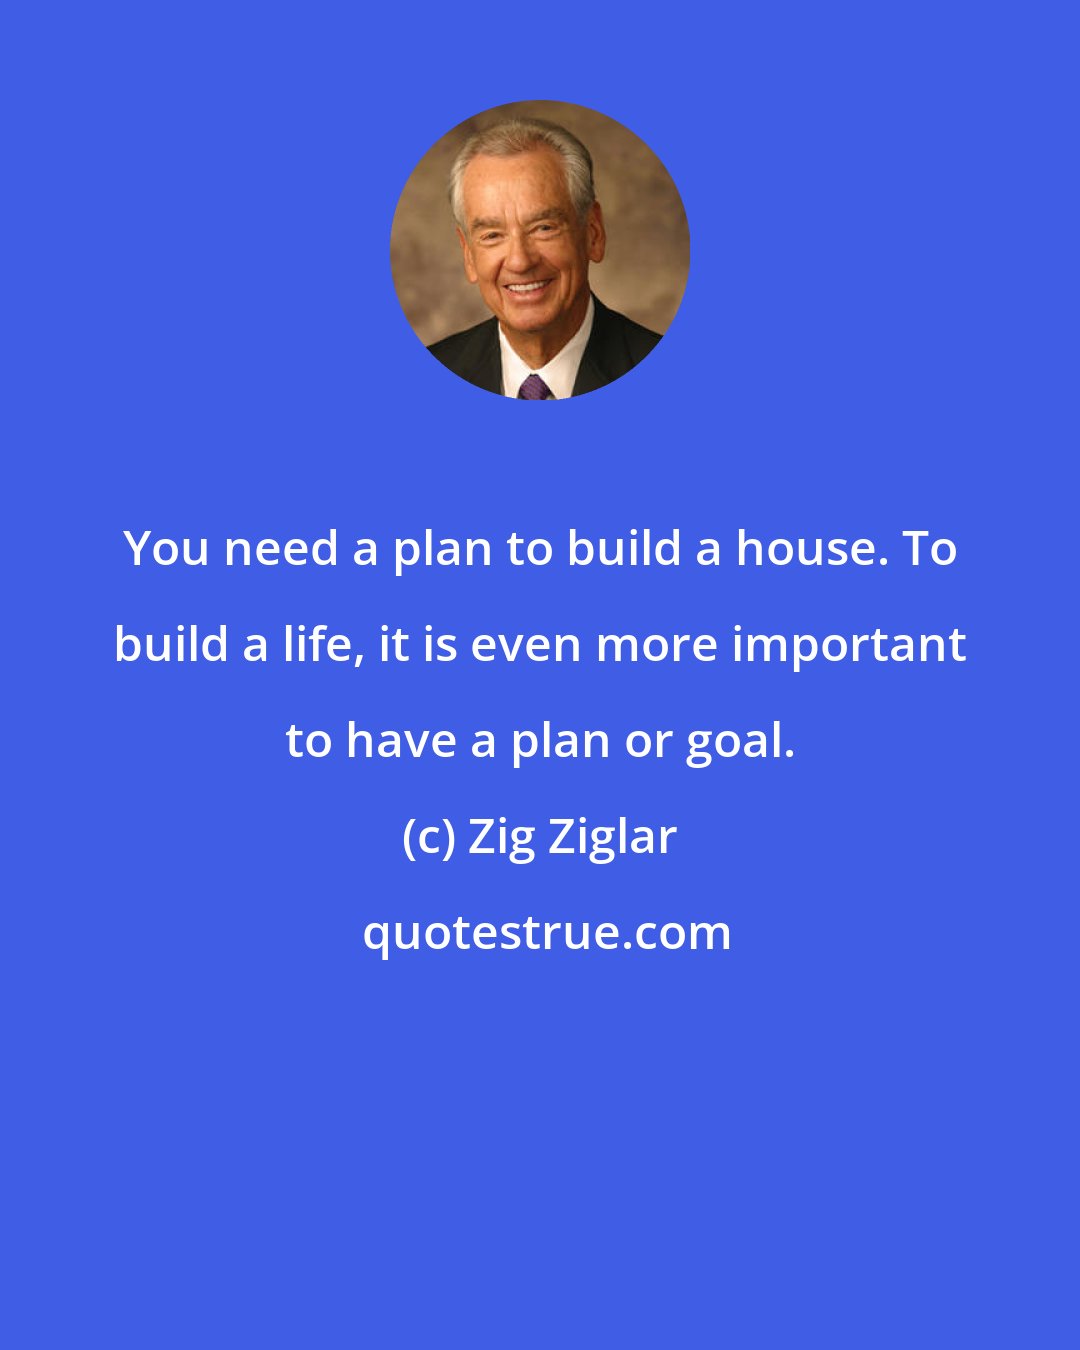 Zig Ziglar: You need a plan to build a house. To build a life, it is even more important to have a plan or goal.